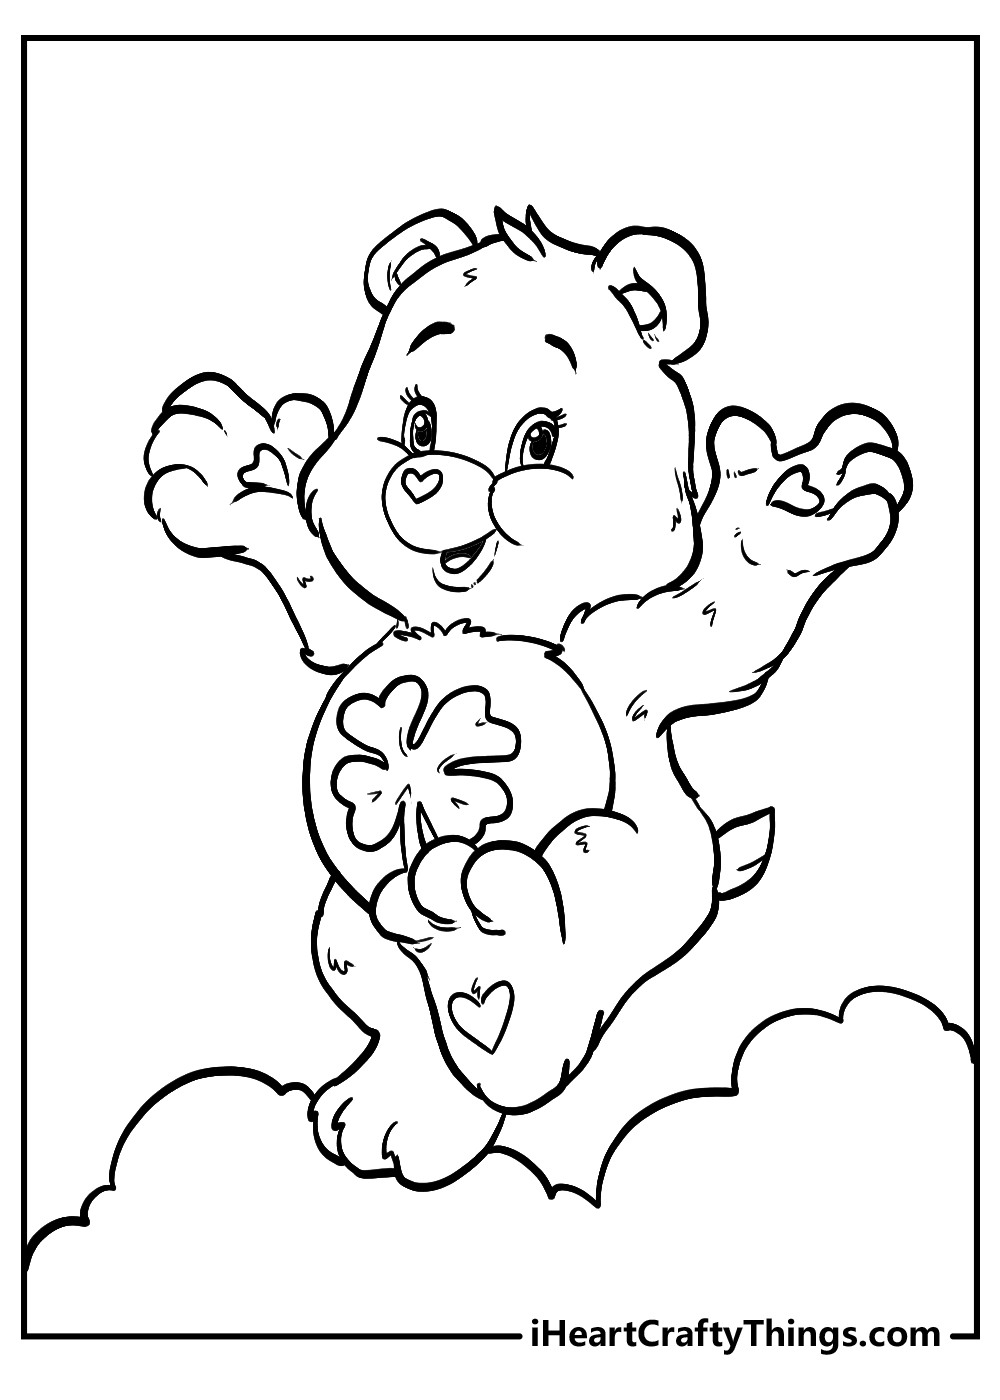 black and white care bears coloring pages